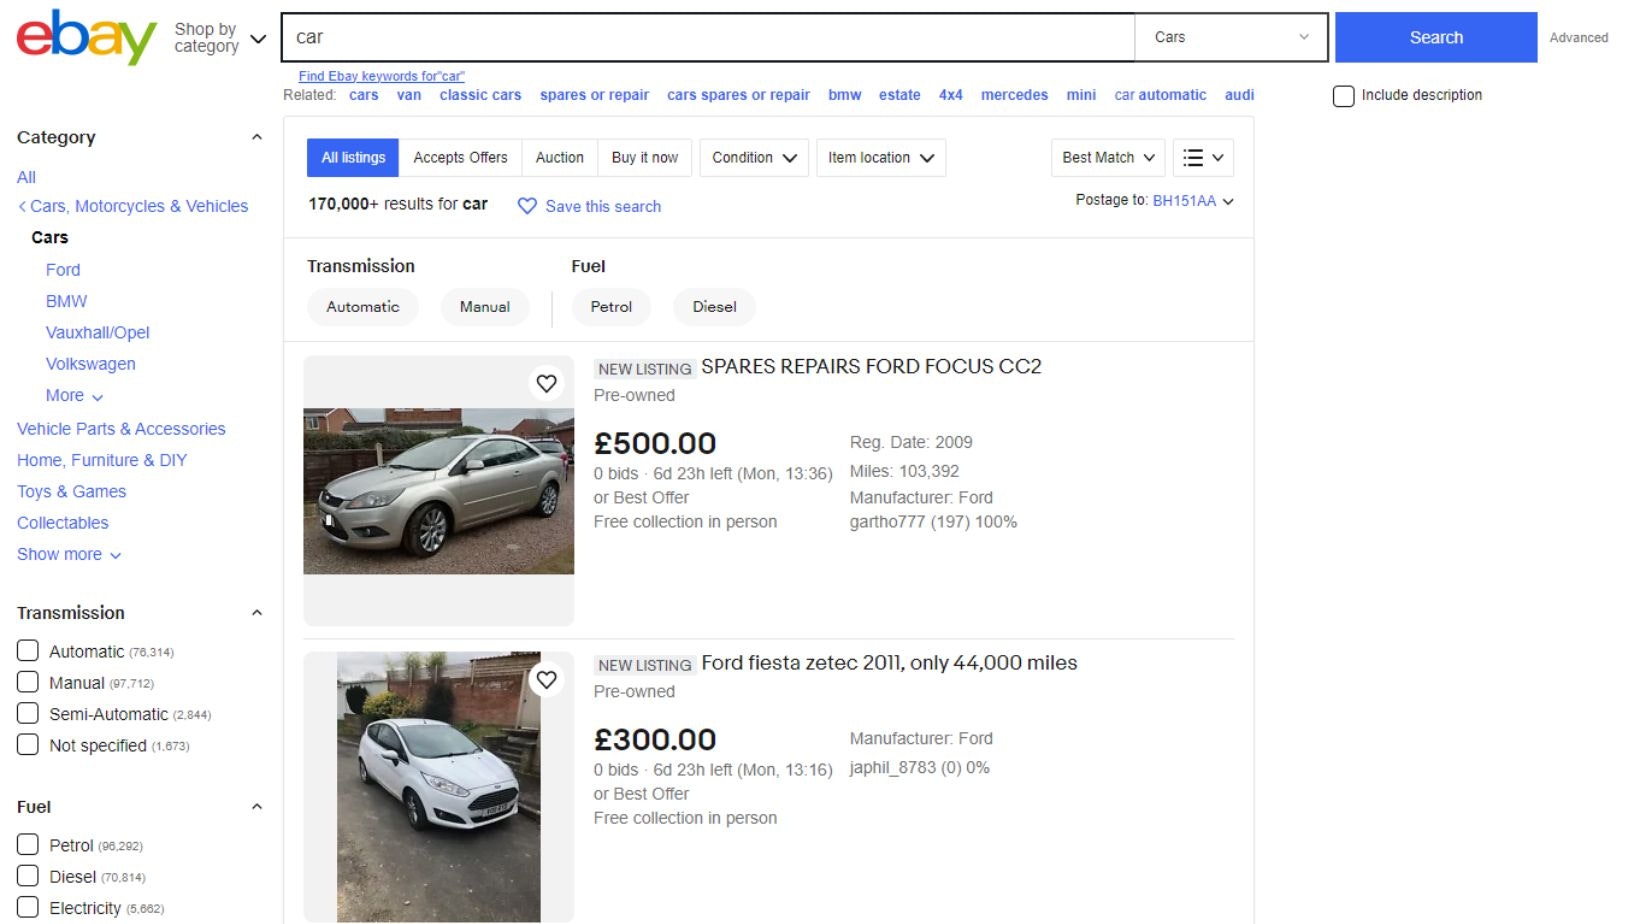 Steps on how to buy a car on eBay. The image features a computer screen displaying the eBay Motors website and a hand holding a credit card while filling out the payment details. The eBay Motors search bar and search results for 'used cars' are also visible on the screen, with a car image in the background.